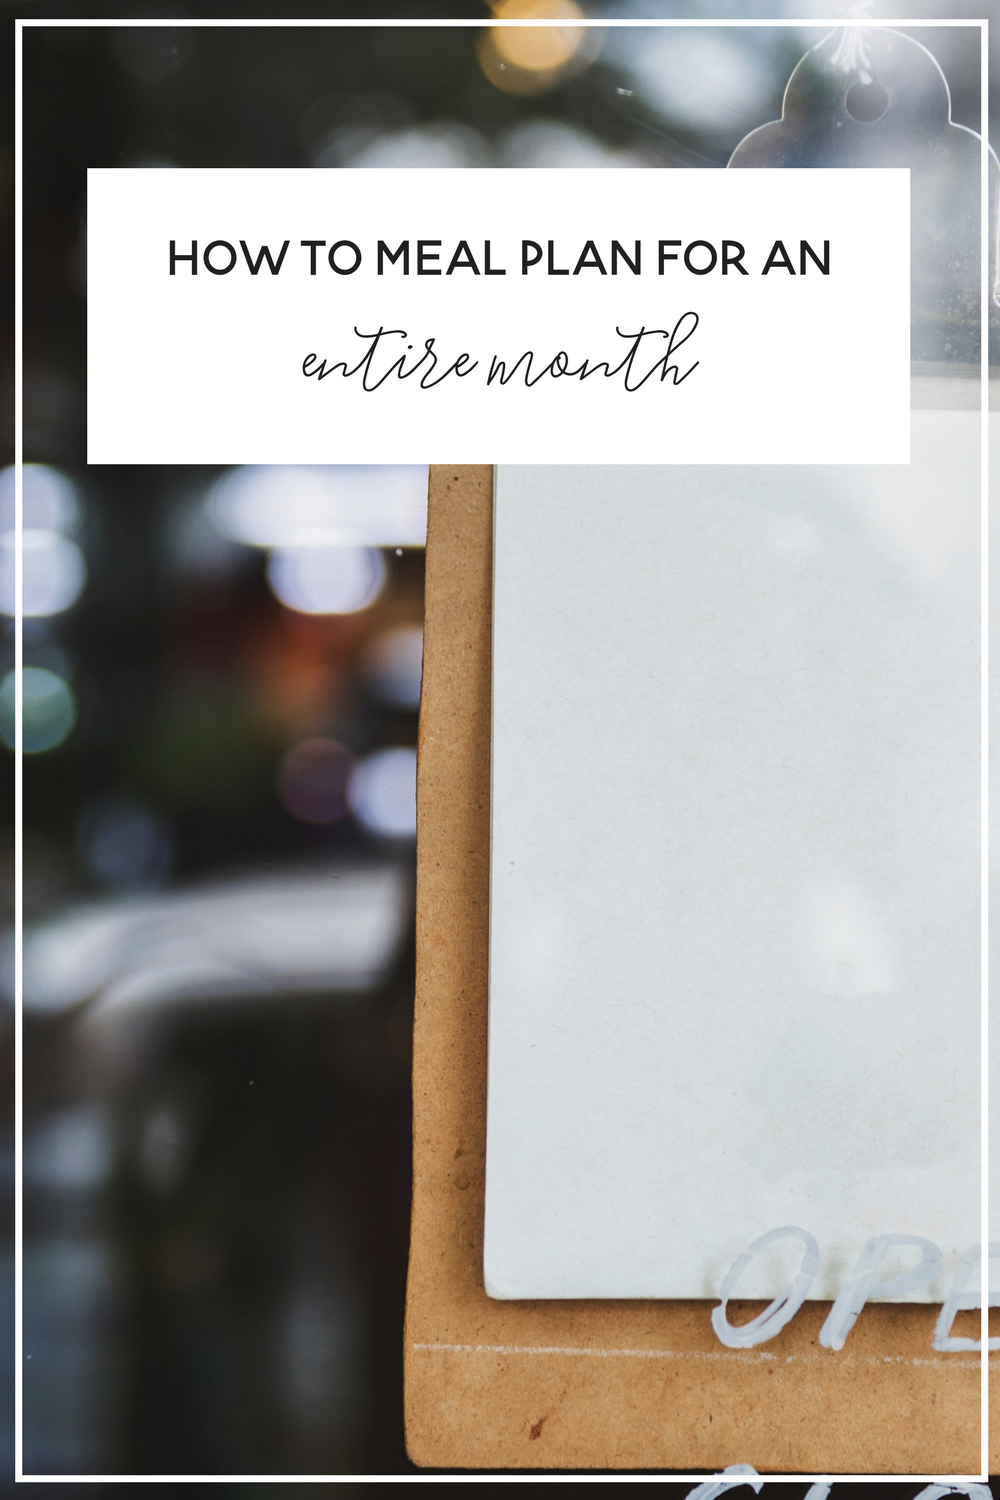 How to Meal Plan for an Entire Month